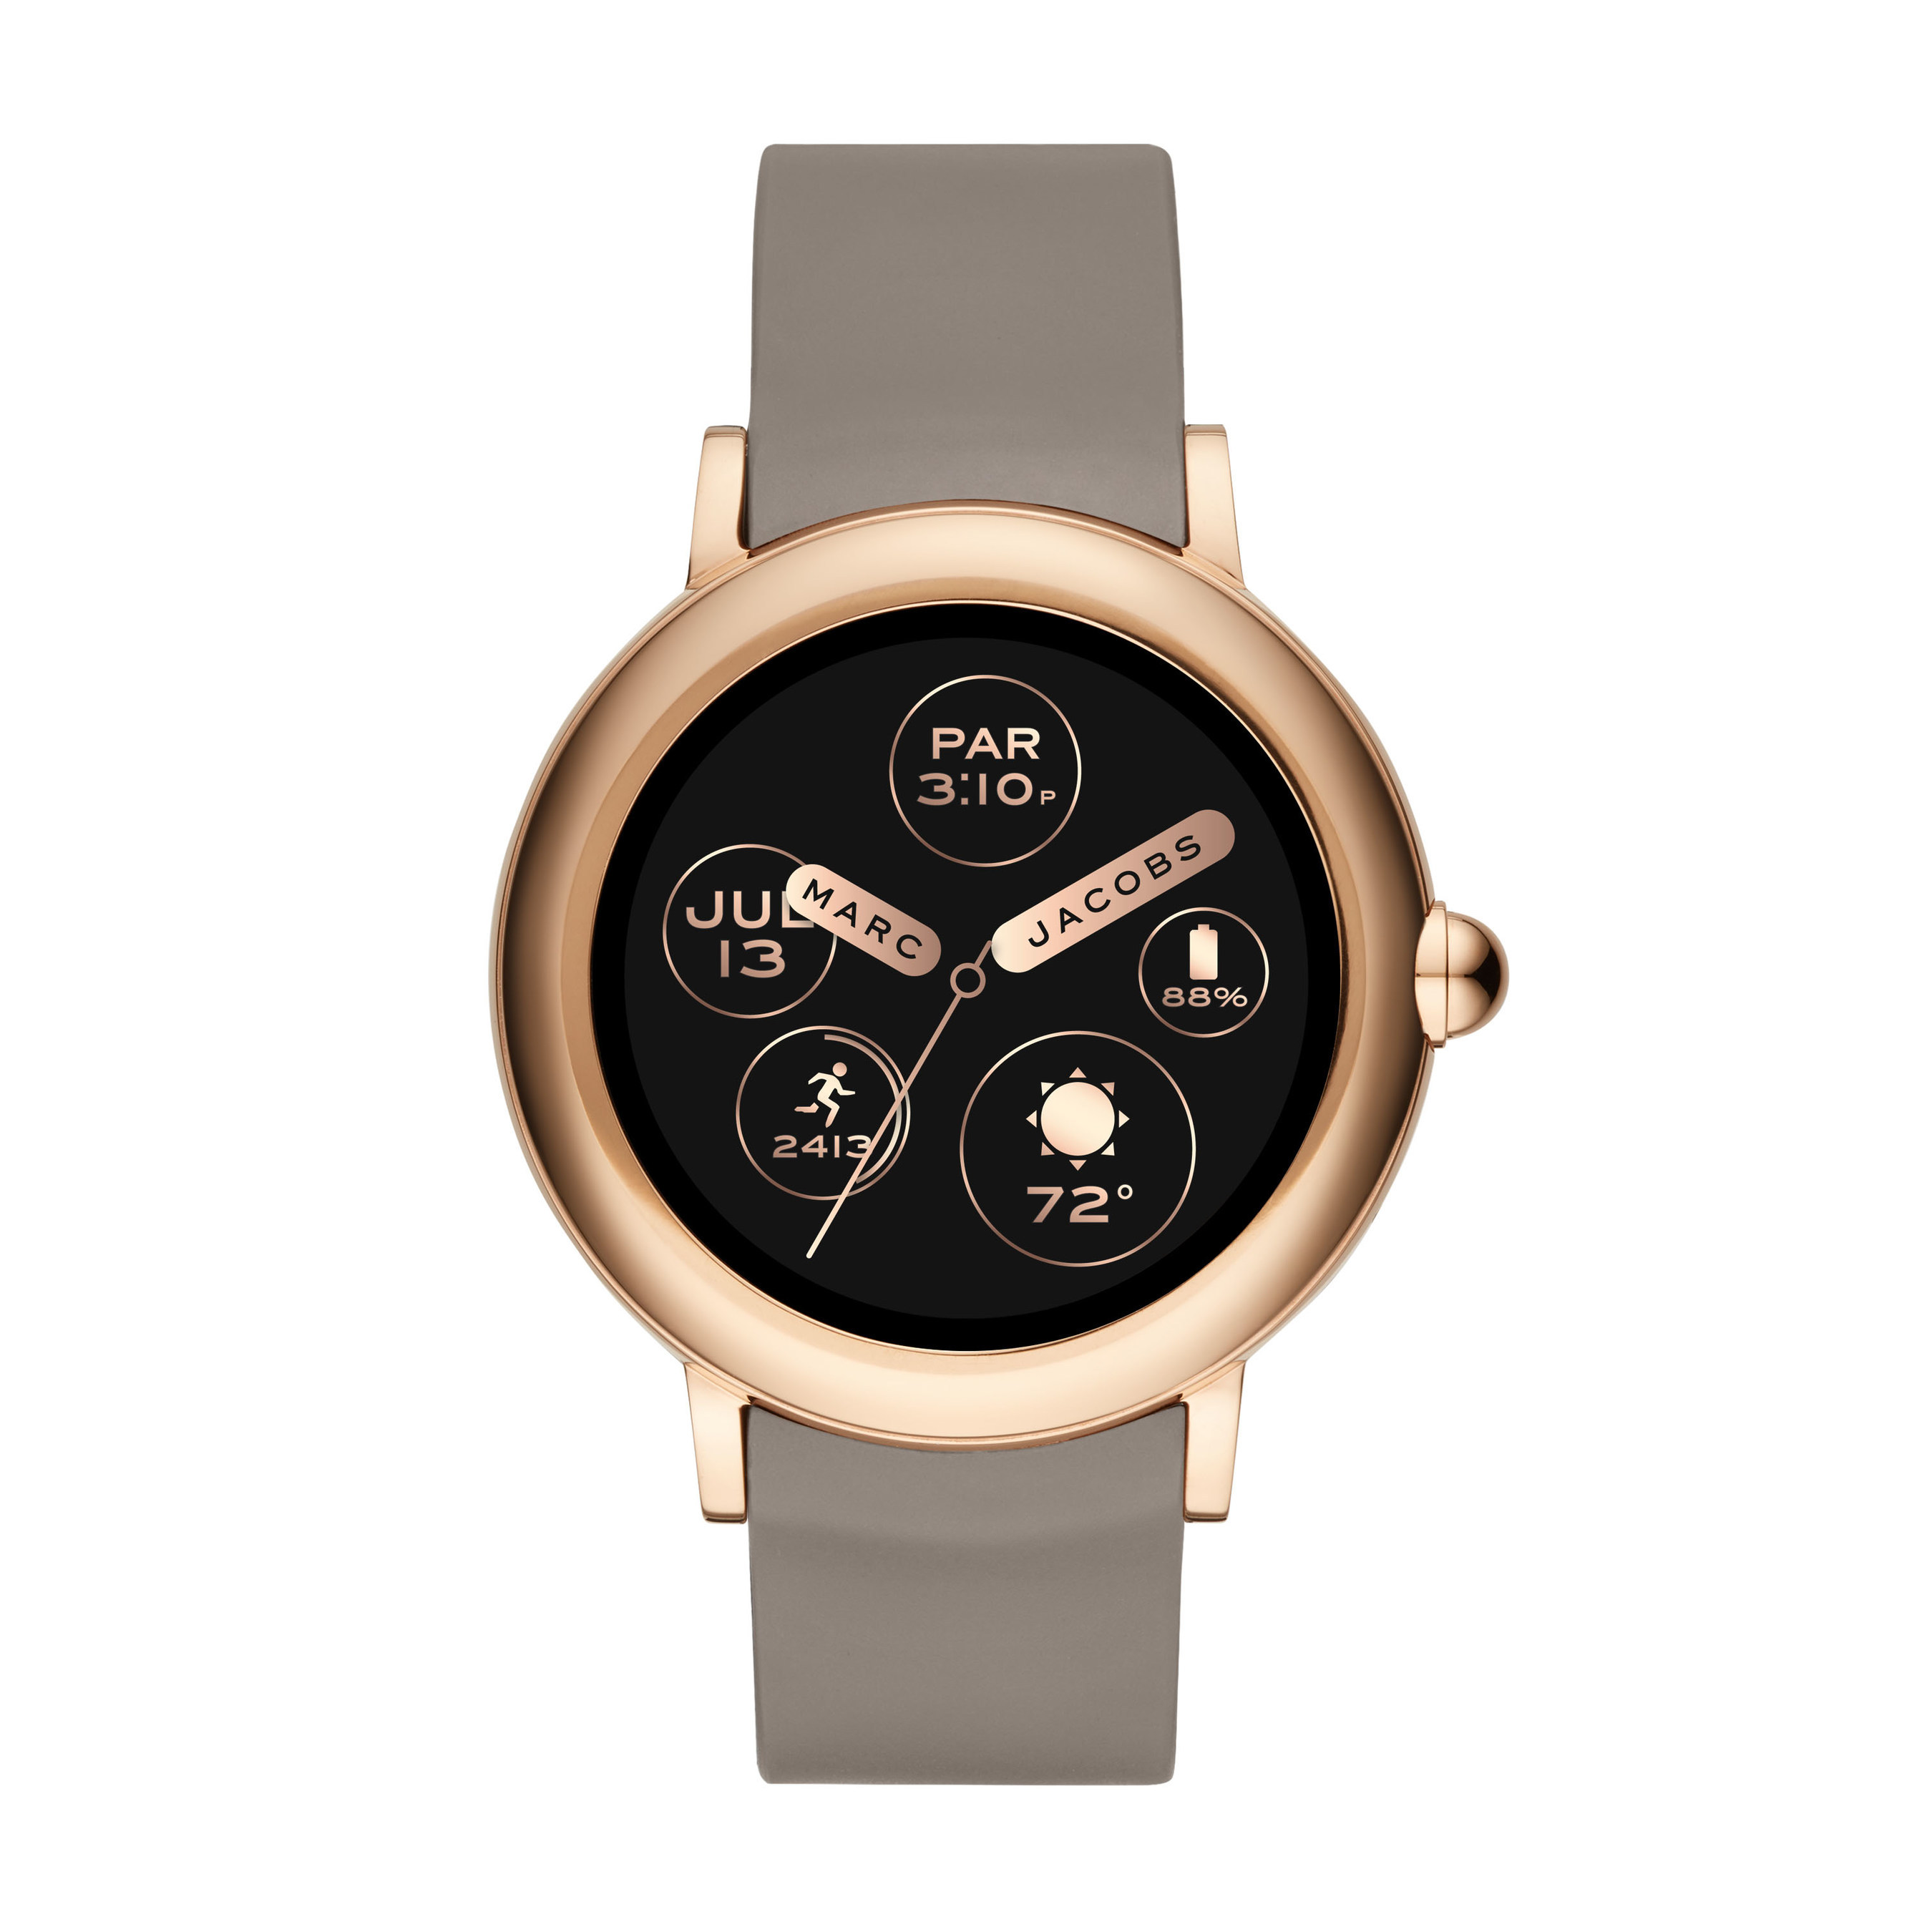 Marc Jacobs Introduces the New Riley Touchscreen Smartwatch